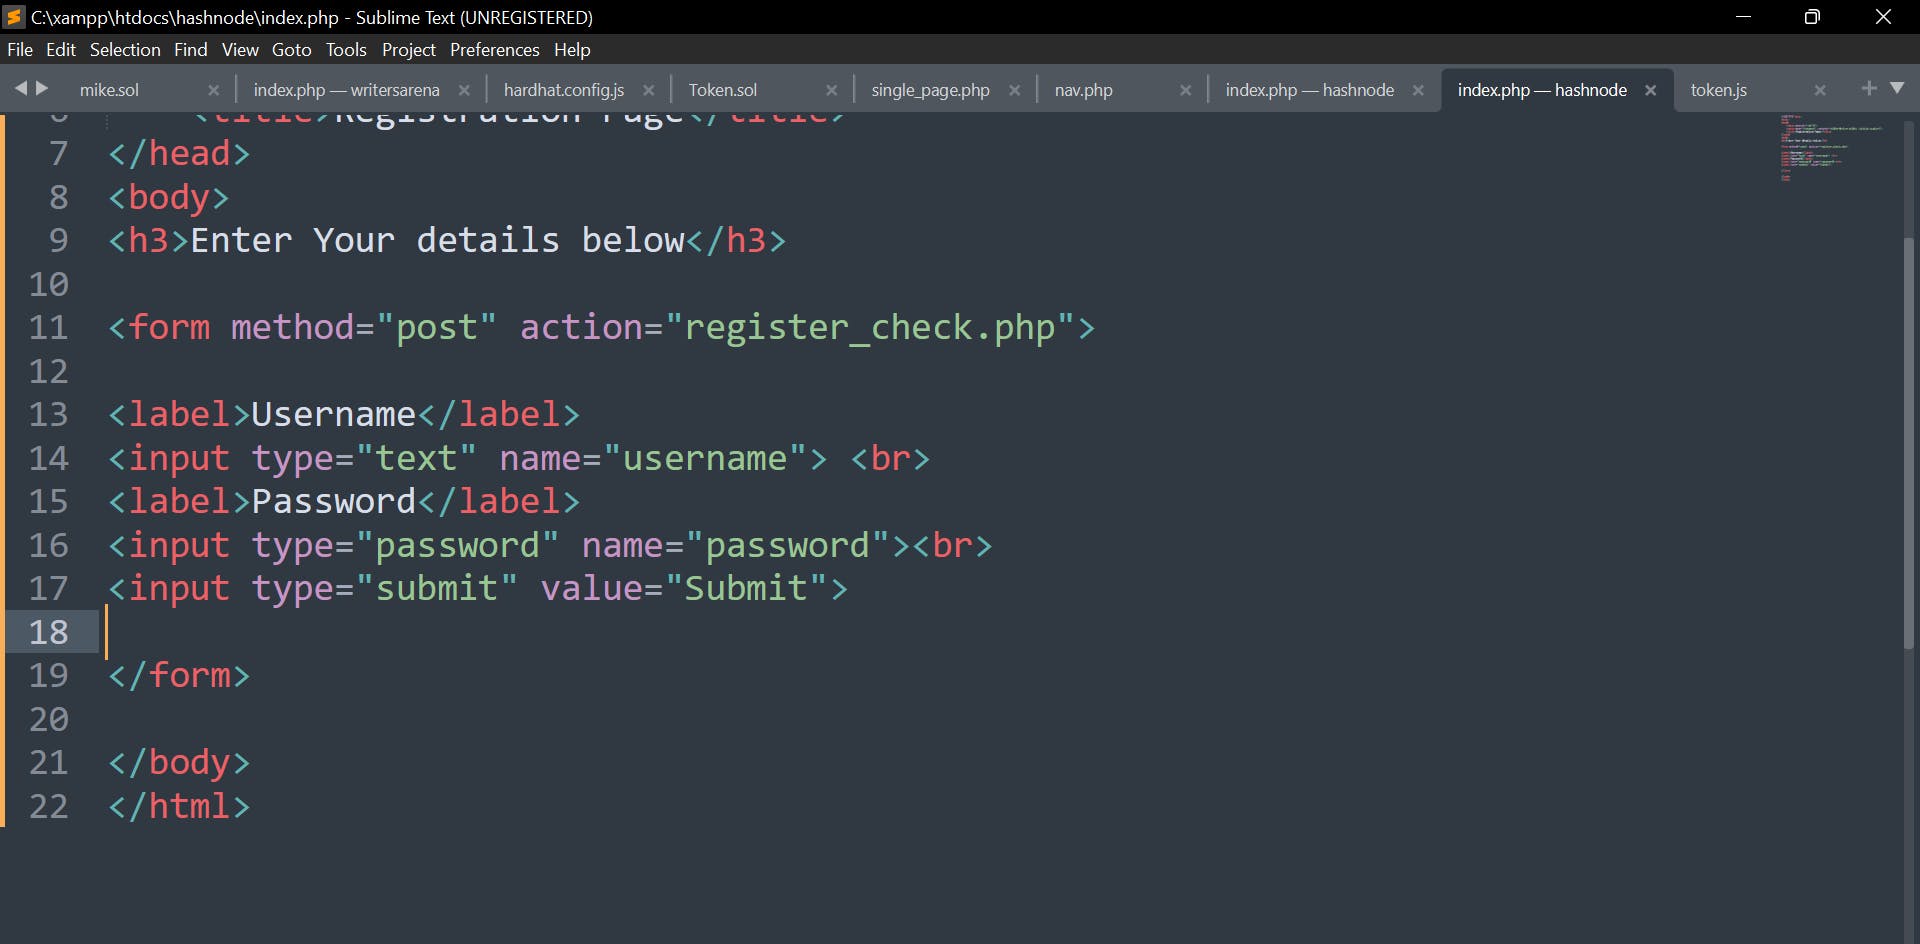 C__xampp_htdocs_hashnode_index.php • - Sublime Text (UNREGISTERED) 30-Sep-22 3_00_47 PM.png